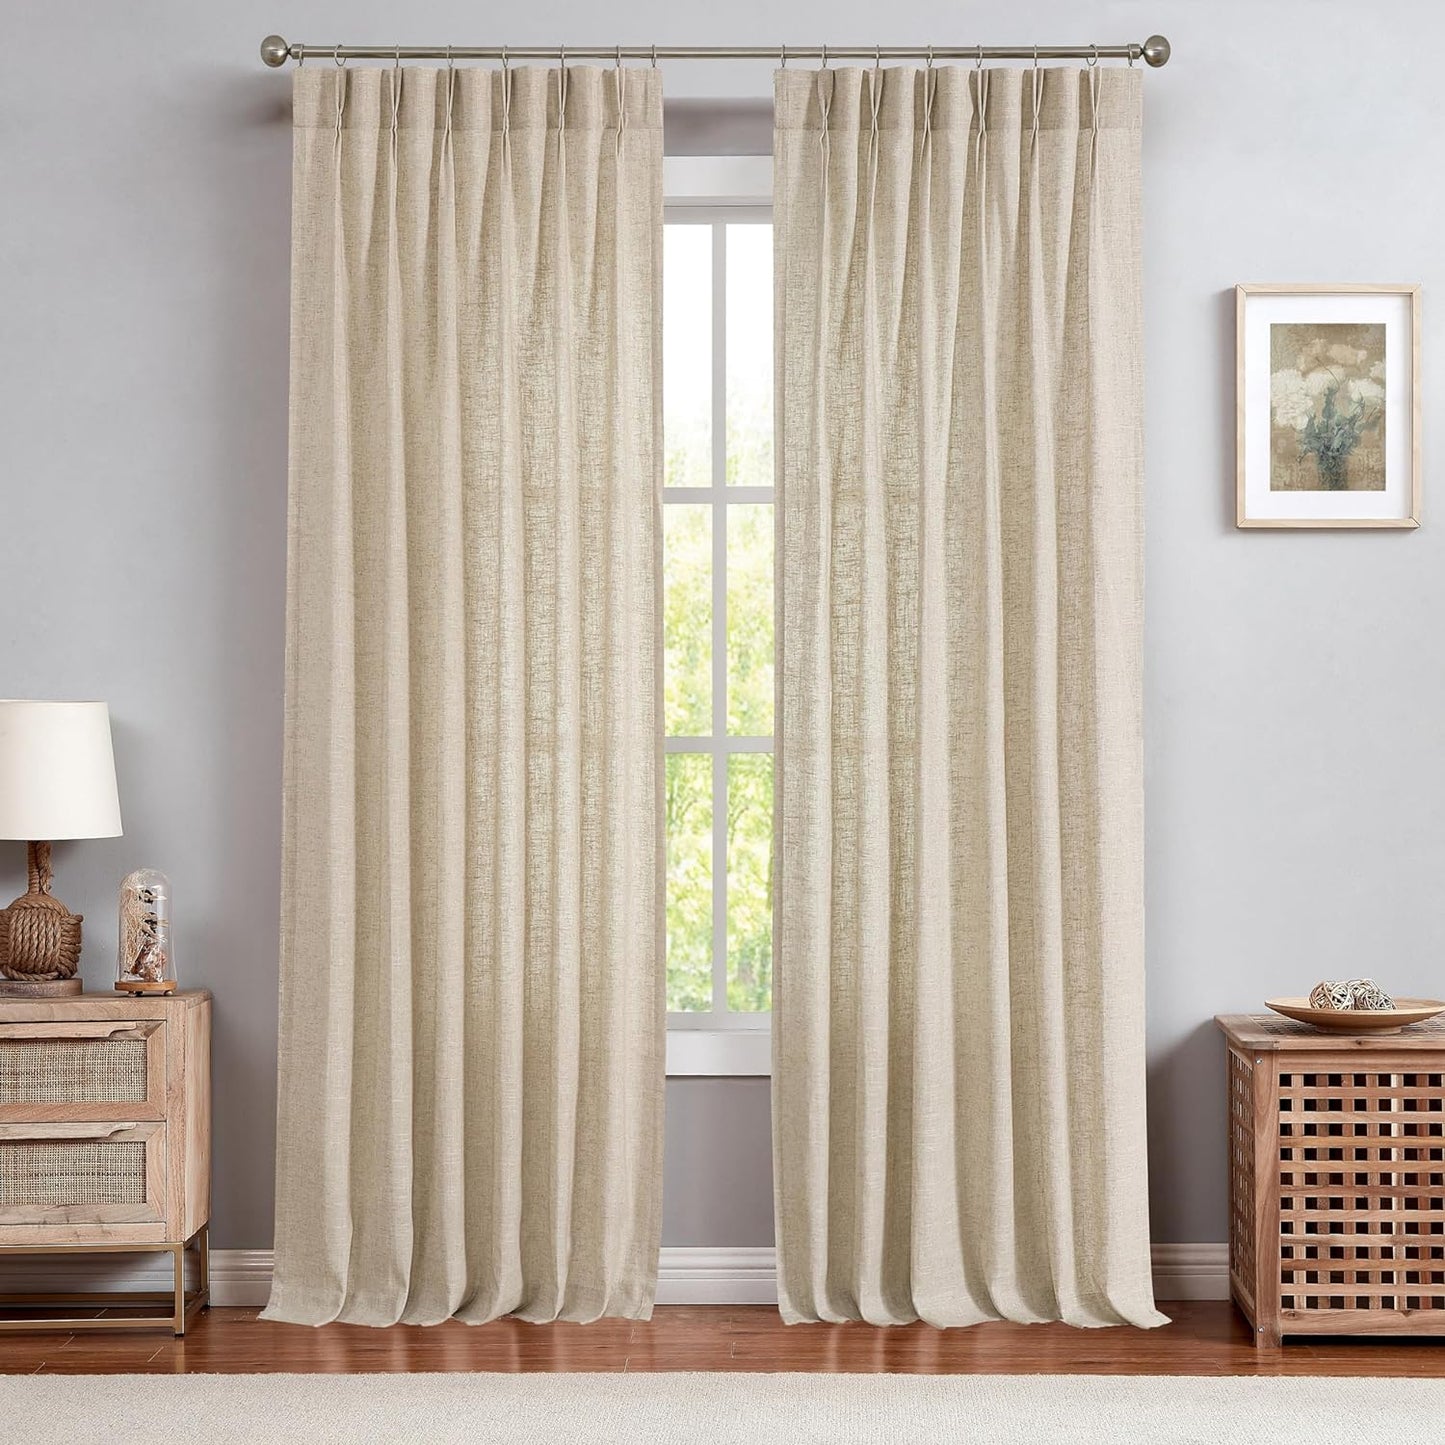 White Pinch Pleated Curtain Semi Sheer Curtain Panel Linen Cotton Blend Decorative Drape 84 Inches Long for Living Room Bedroom Farmhouse Rustic Window Treatment, White, 34"X84"X2  Central Park Linen 34"X84"X2 